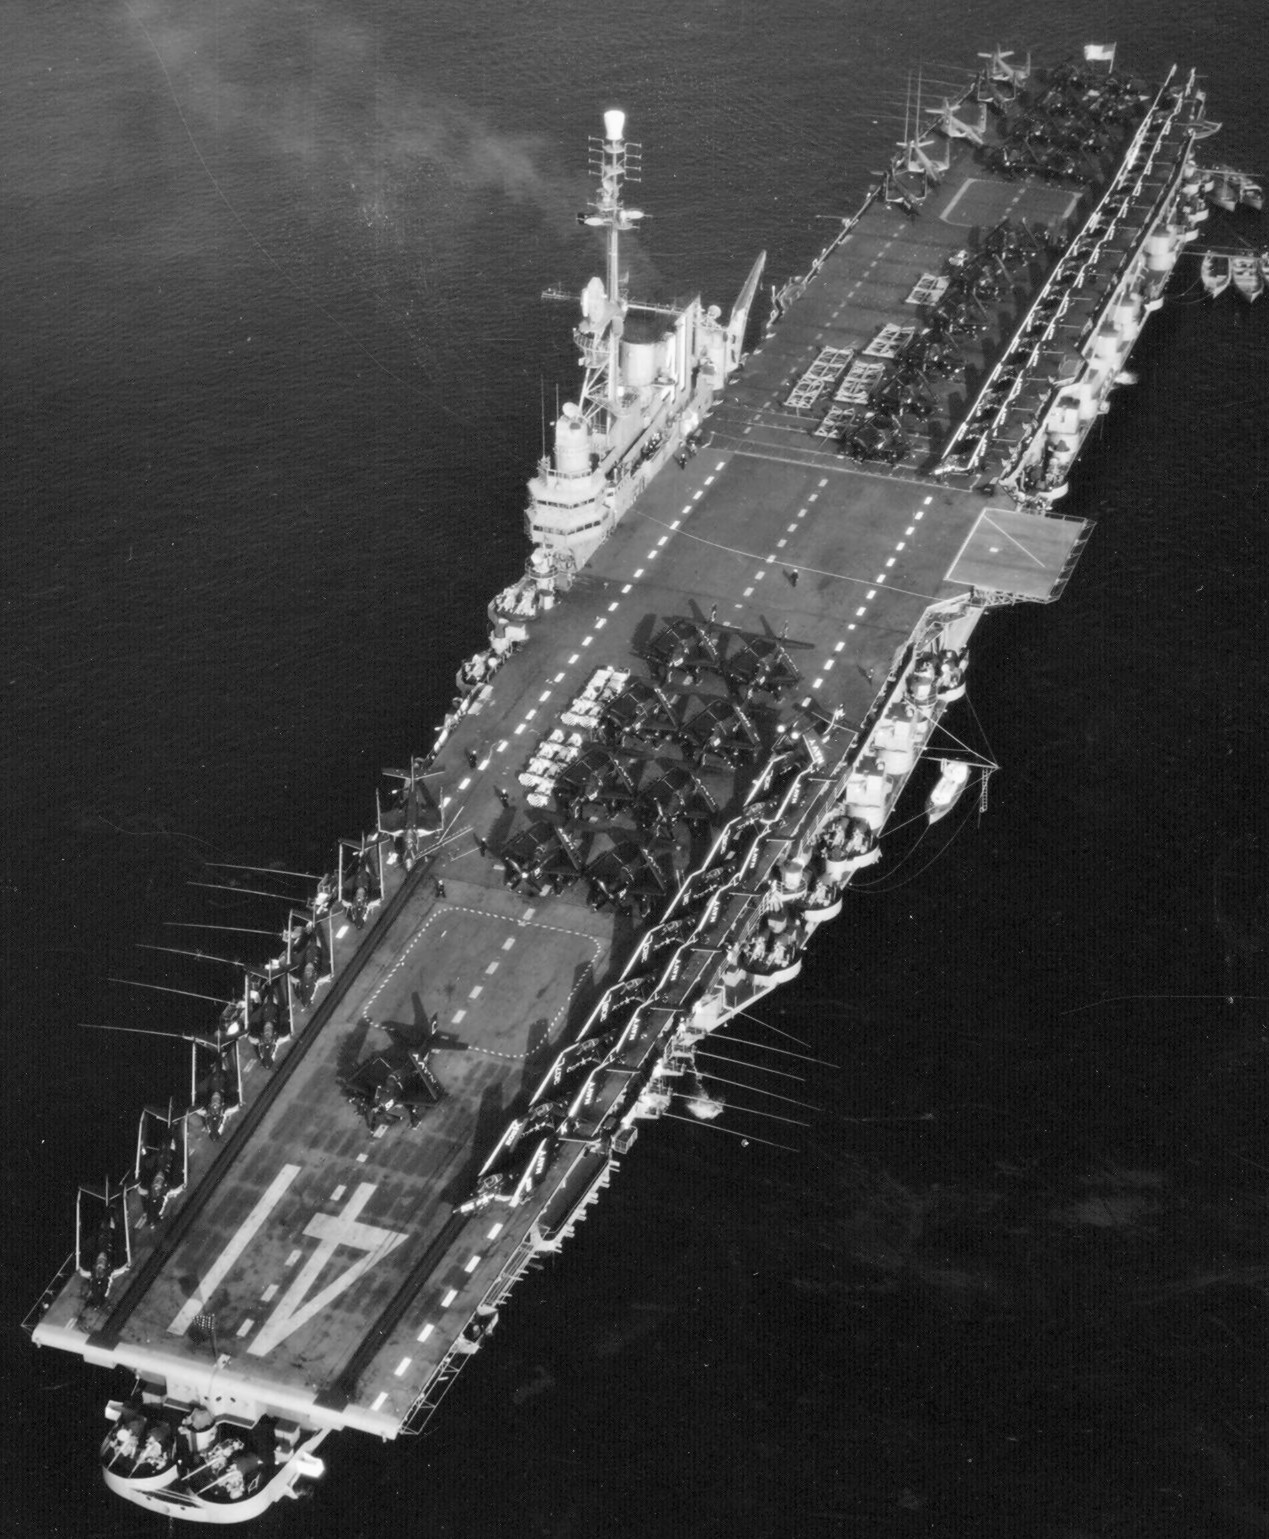 cvg-6 carrier air group us navy uss midway cva-41 embarked squadrons 04